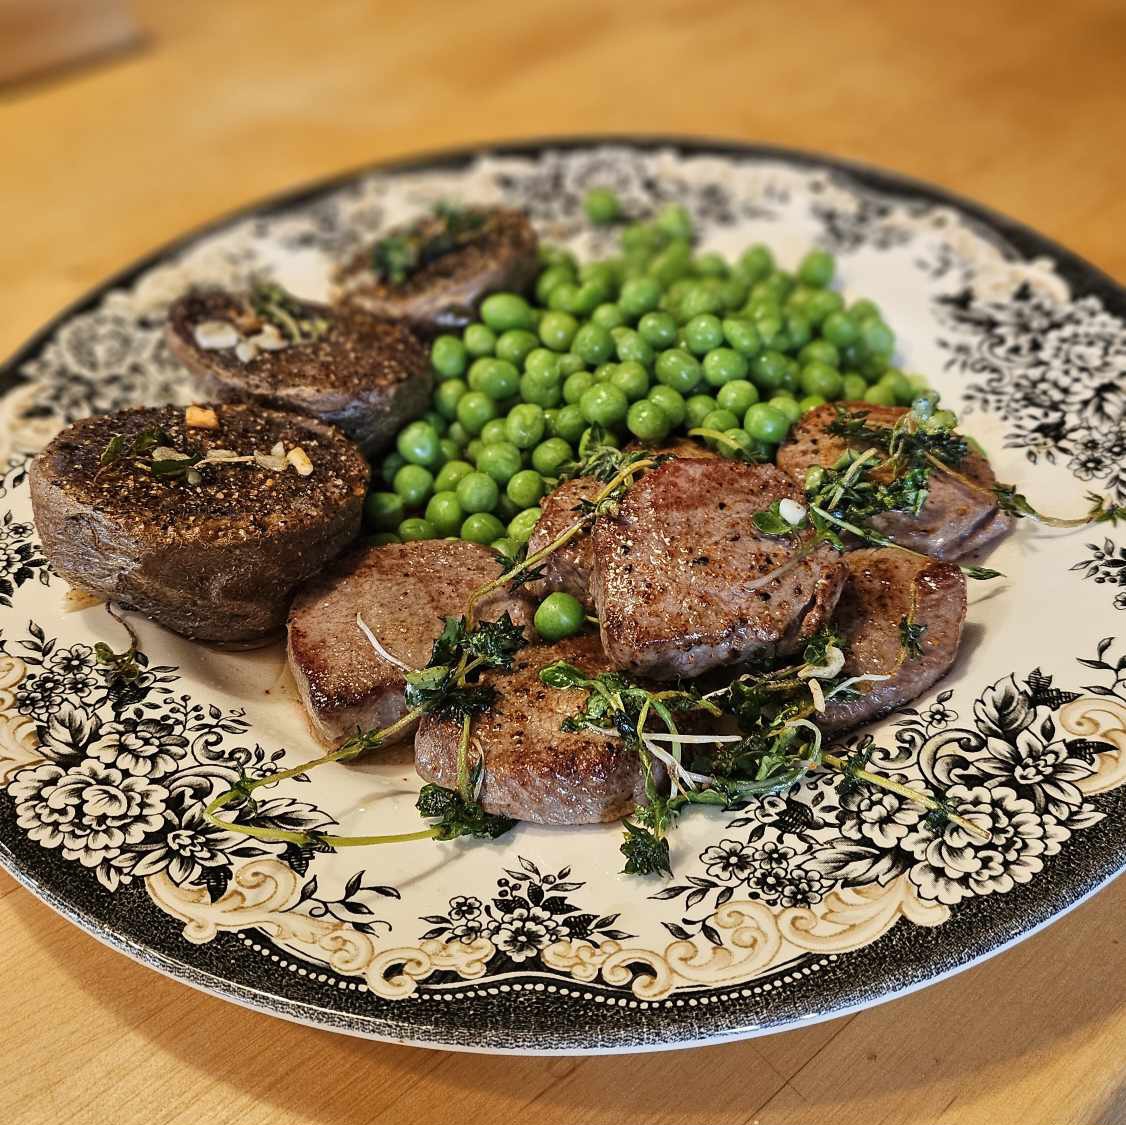 Venison backstrap medallions with radish microgreens and thyme, served beside the last of last year's frozen shelling peas and roasted purple potatoes. Yard to table; everything came from within 50 yards of the kitchen. 

#foodie #homesteading #gardening #hunting